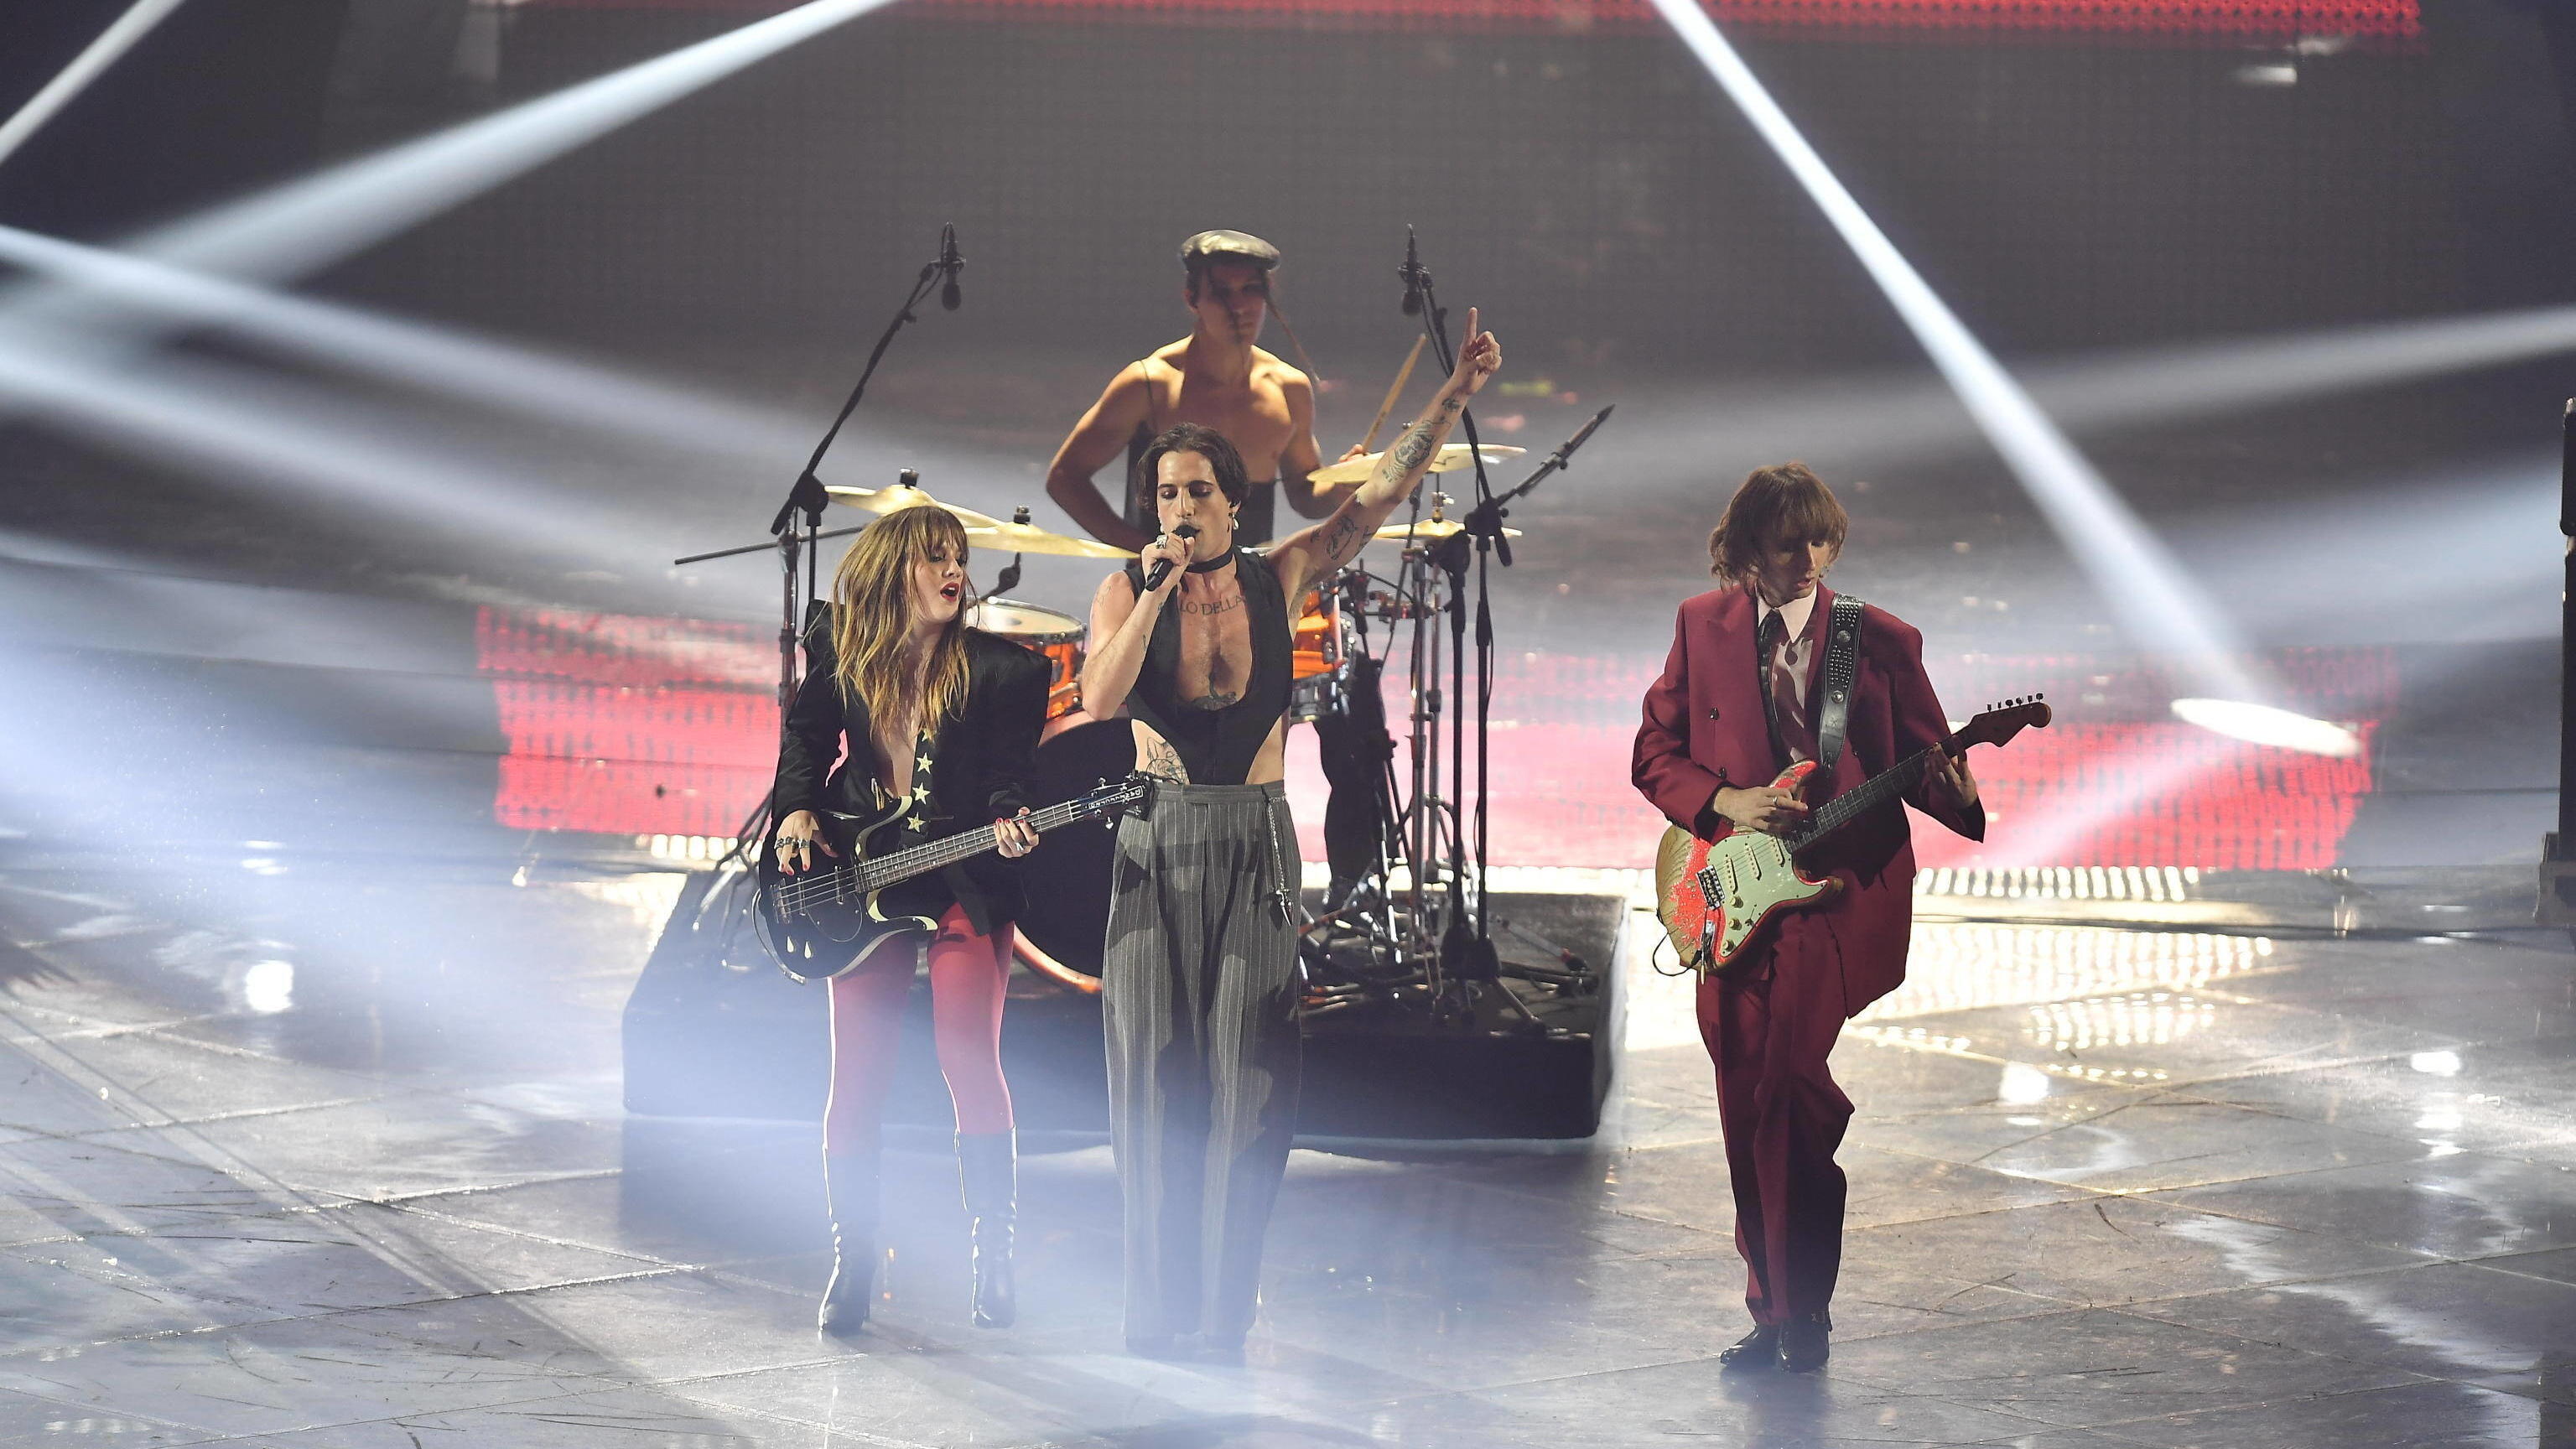  May 14, 2022, Turin: Italian band Maneskin performs during the Final of the 66th annual Eurovision Song Contest ESC 2022 in Turin, Italy, 14 May 2022. ANSA/ALESSANDRO DI MARCO Turin - ZUMAa110 20220514_zaf_a110_198 Copyright: xAlessandroxDixMarcox